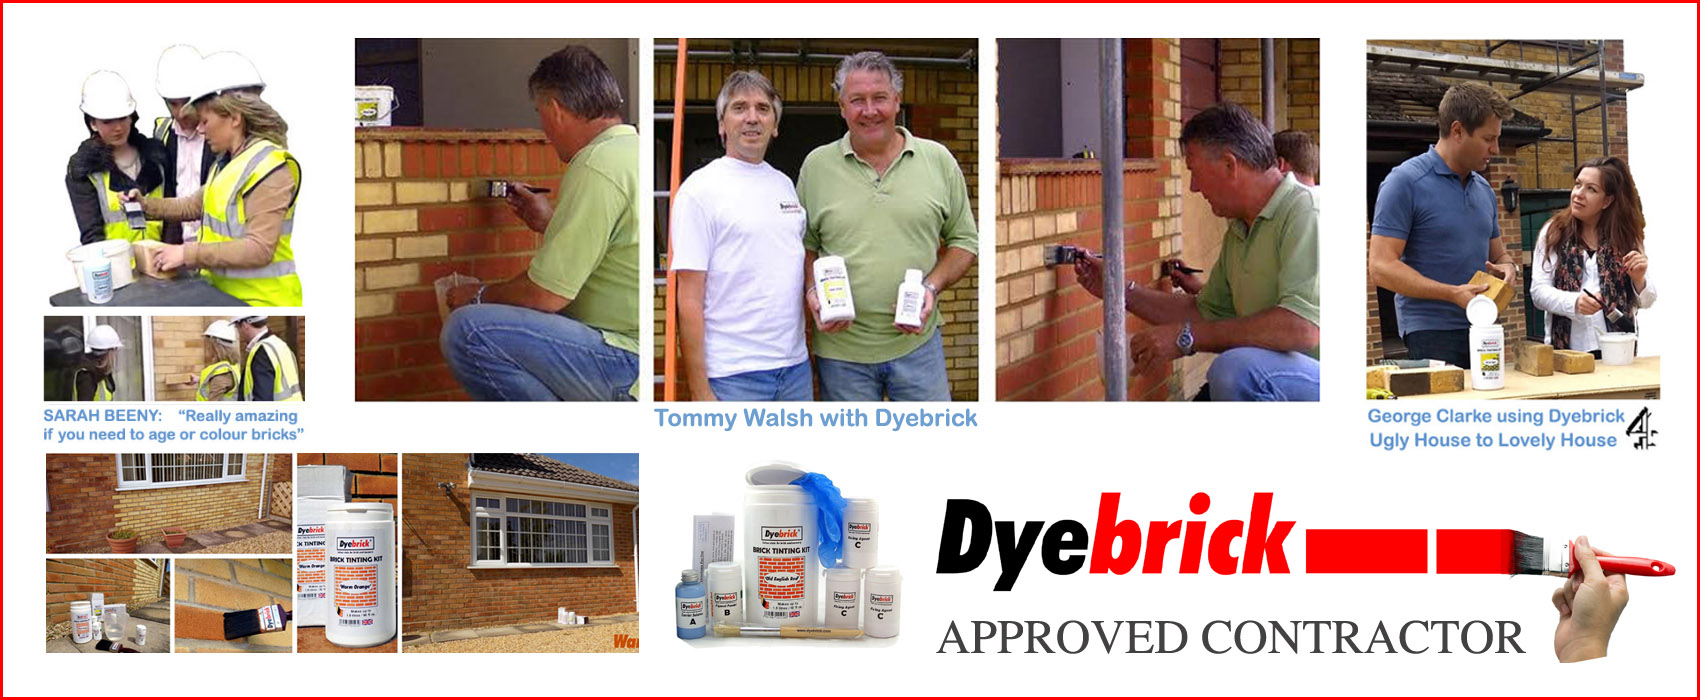 Dyebrick Approved Contractor